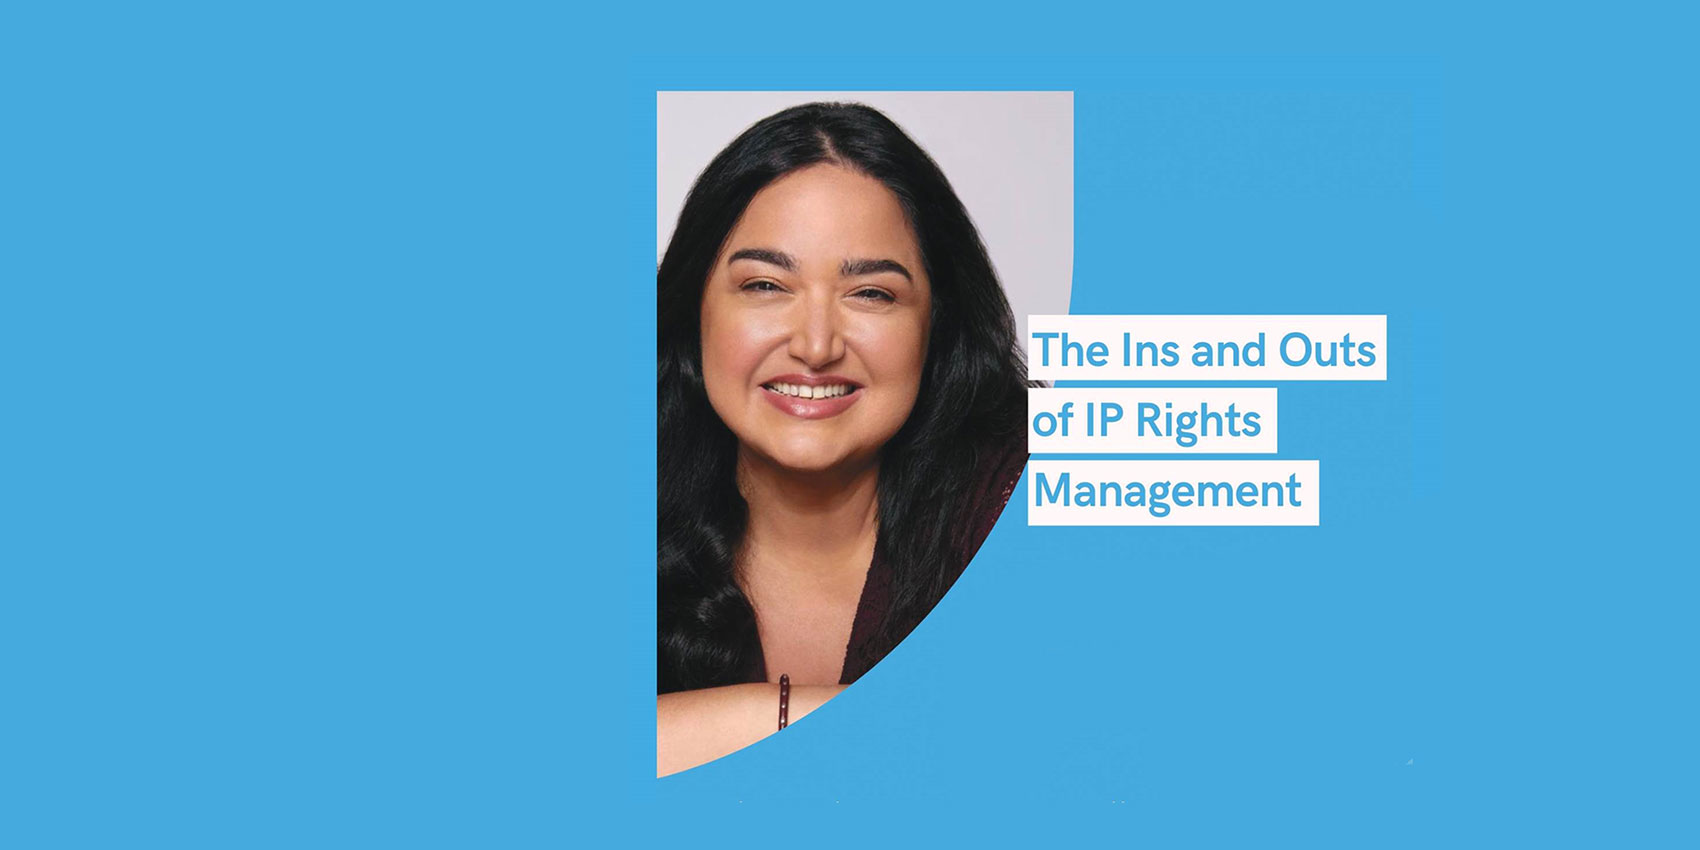 The Ins and Outs of IP Rights Management